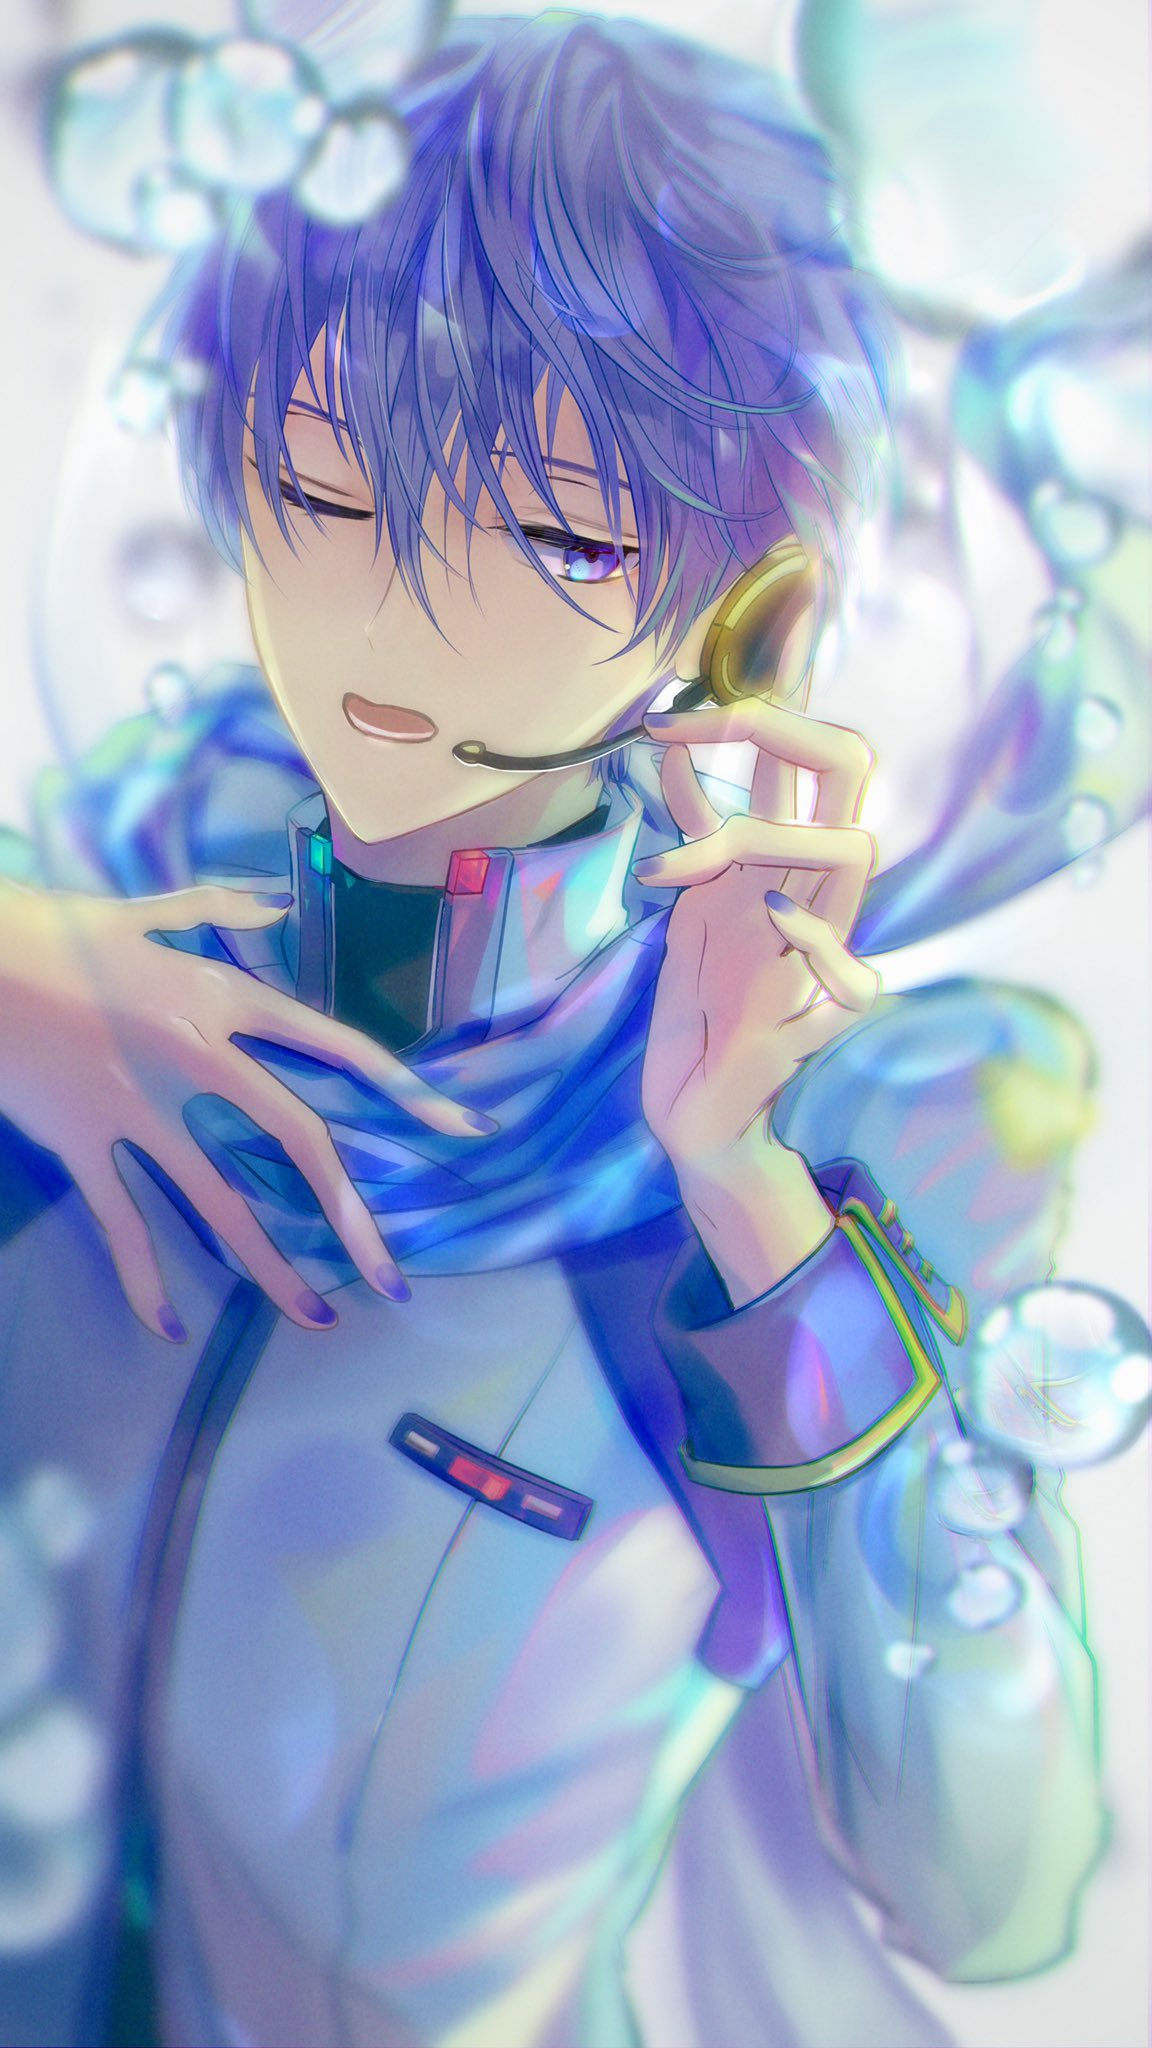 1152x2048 KAITO VOCALOID | page 2 of 206 Zerochan Anime Image Board